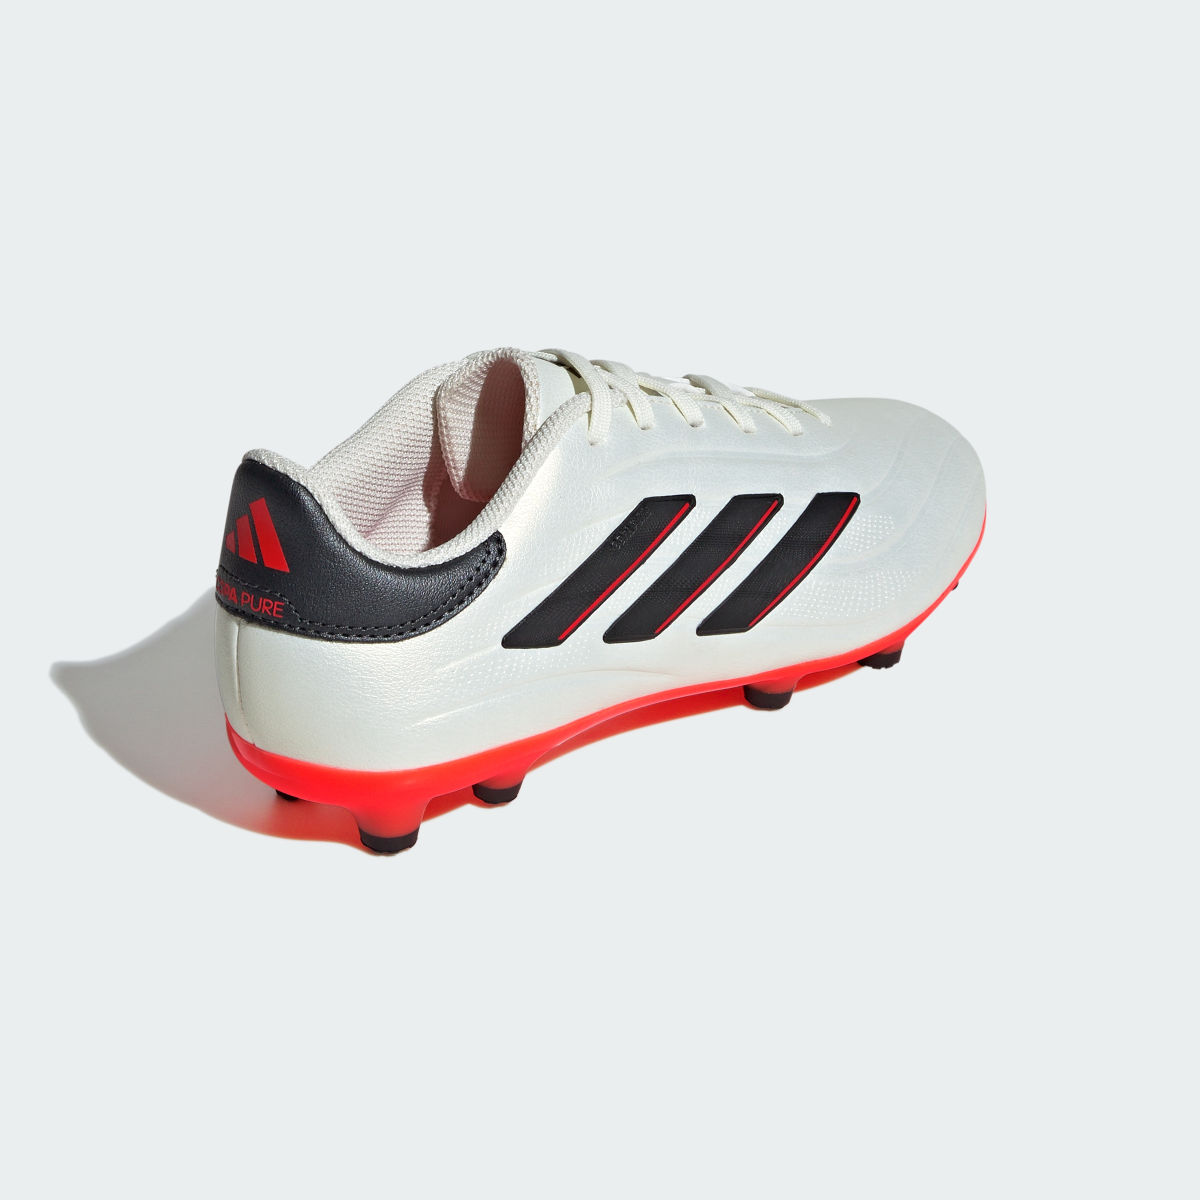 Adidas Copa Pure II League Firm Ground Cleats. 6